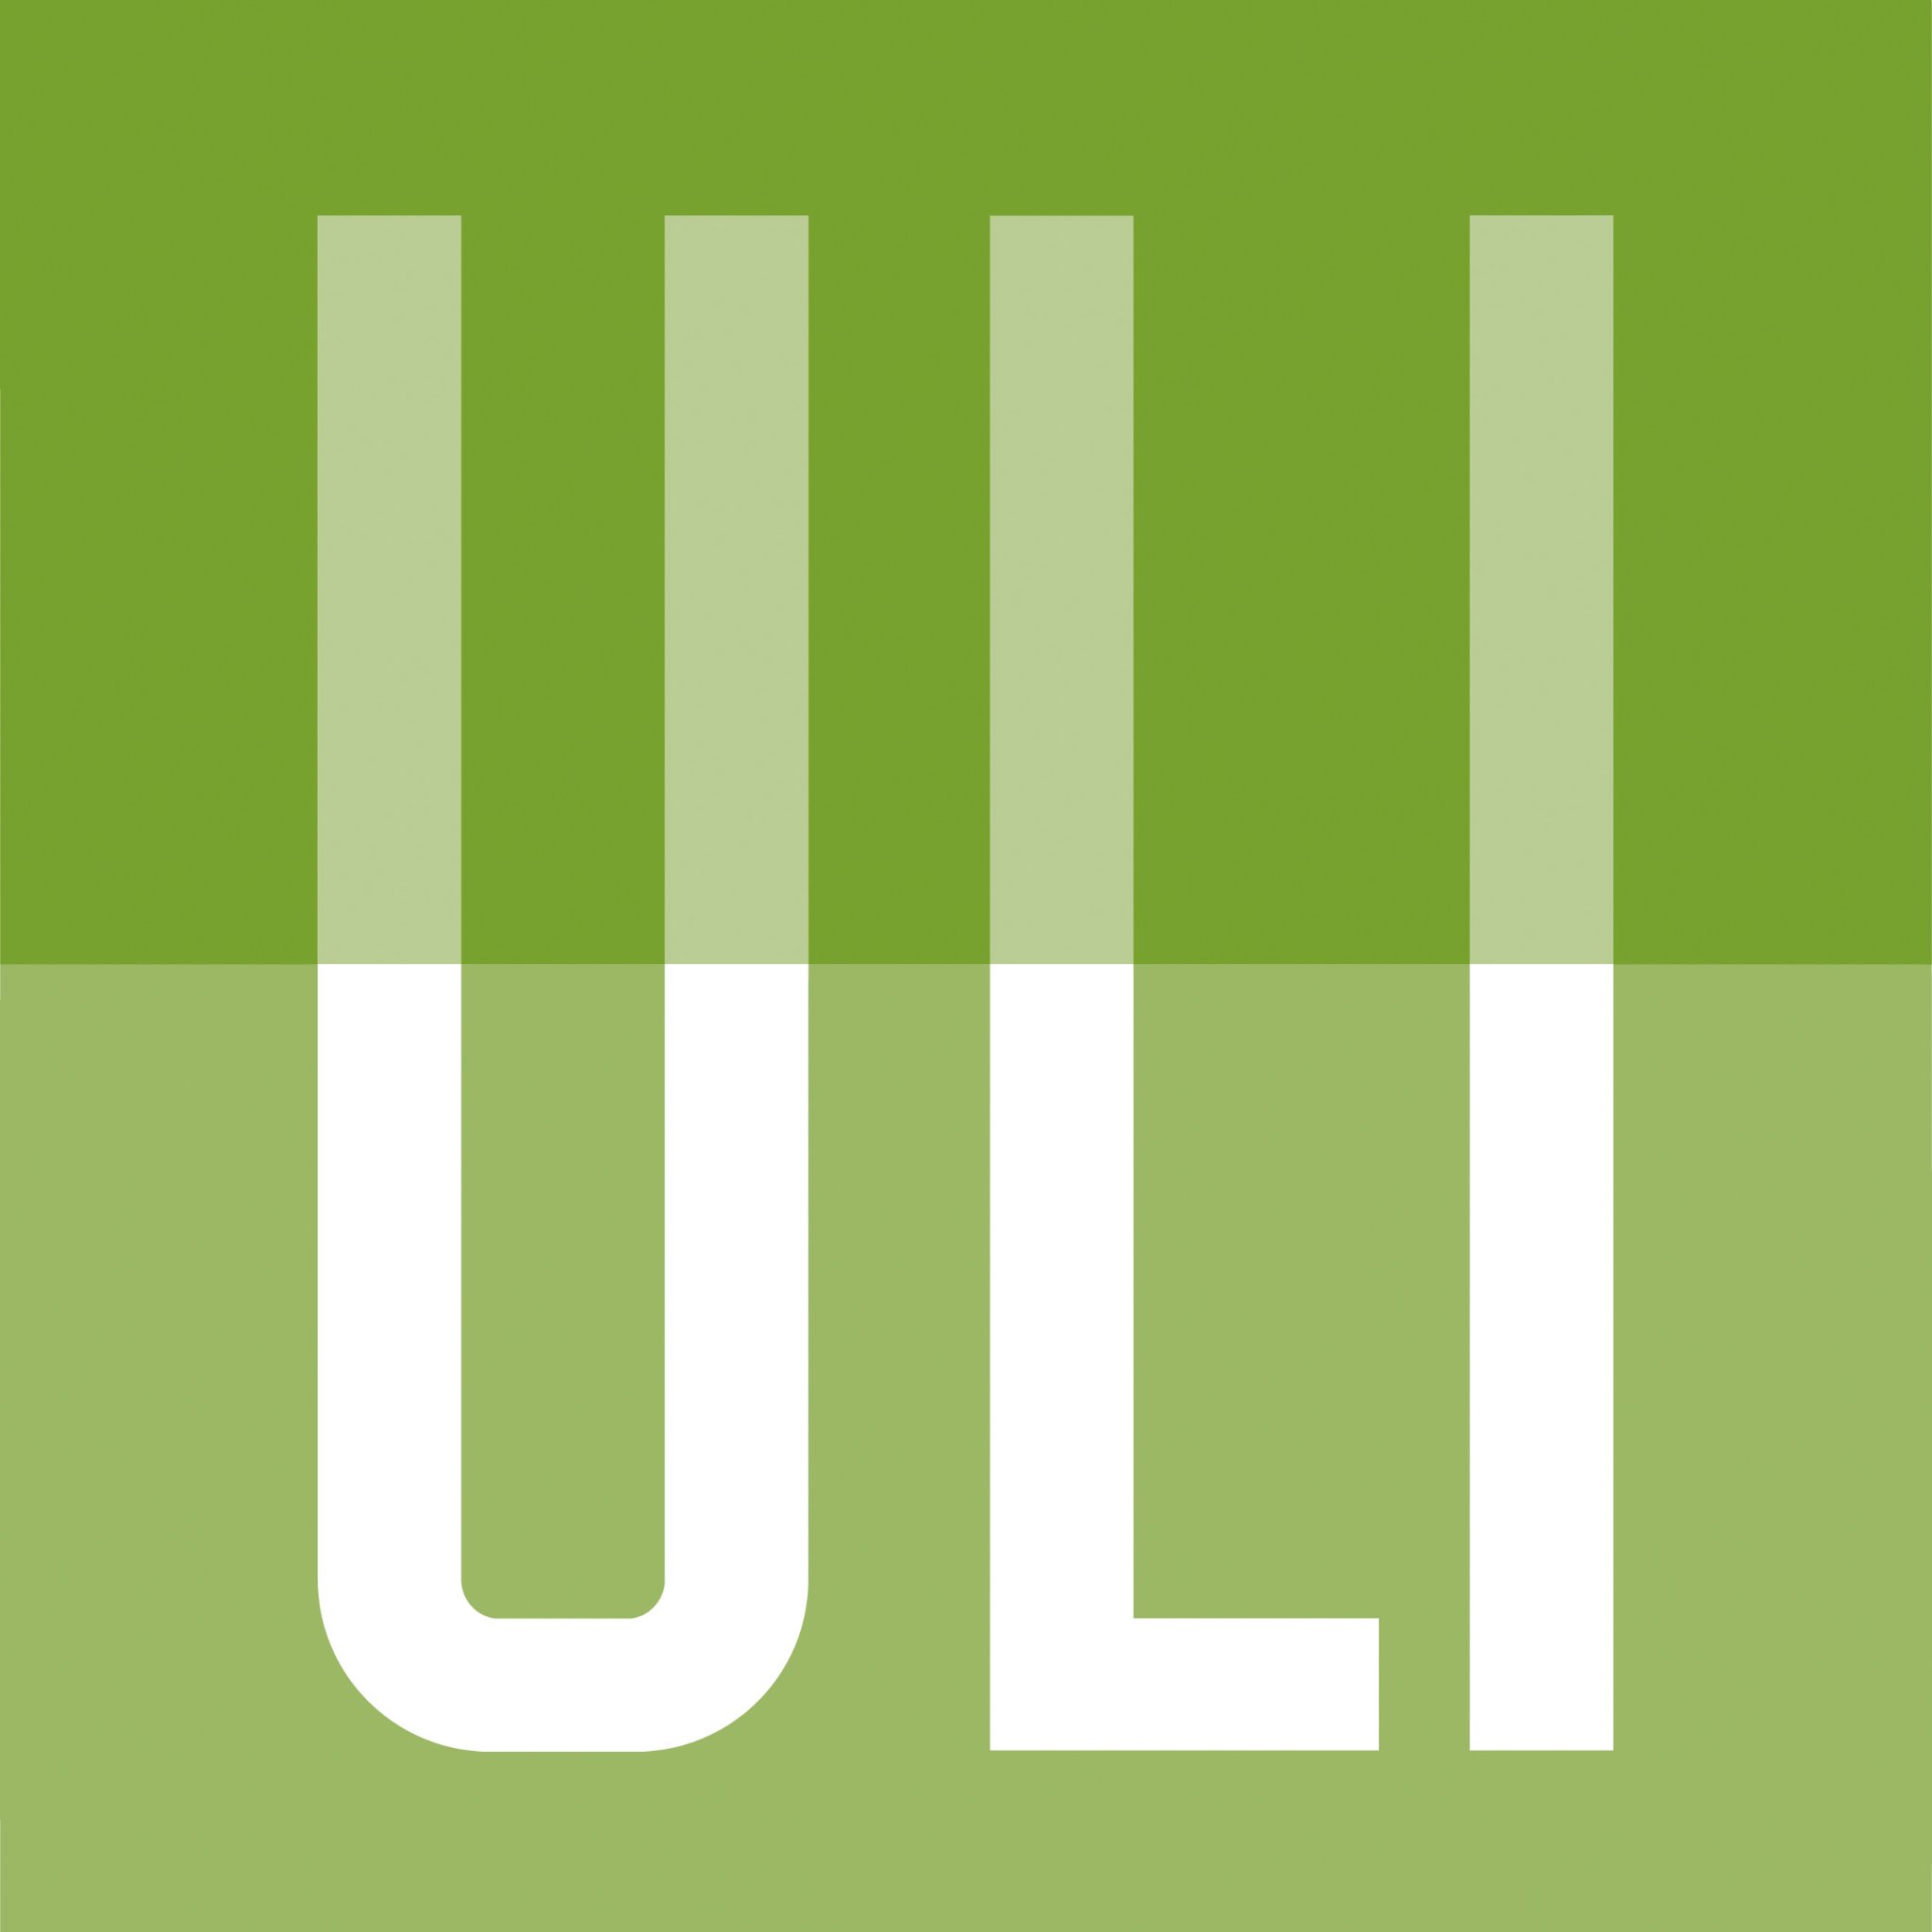 We are a Local Organizing Committee for @UrbanLandInst shaping the future of the built environment for transformative impact in Alabama communities.